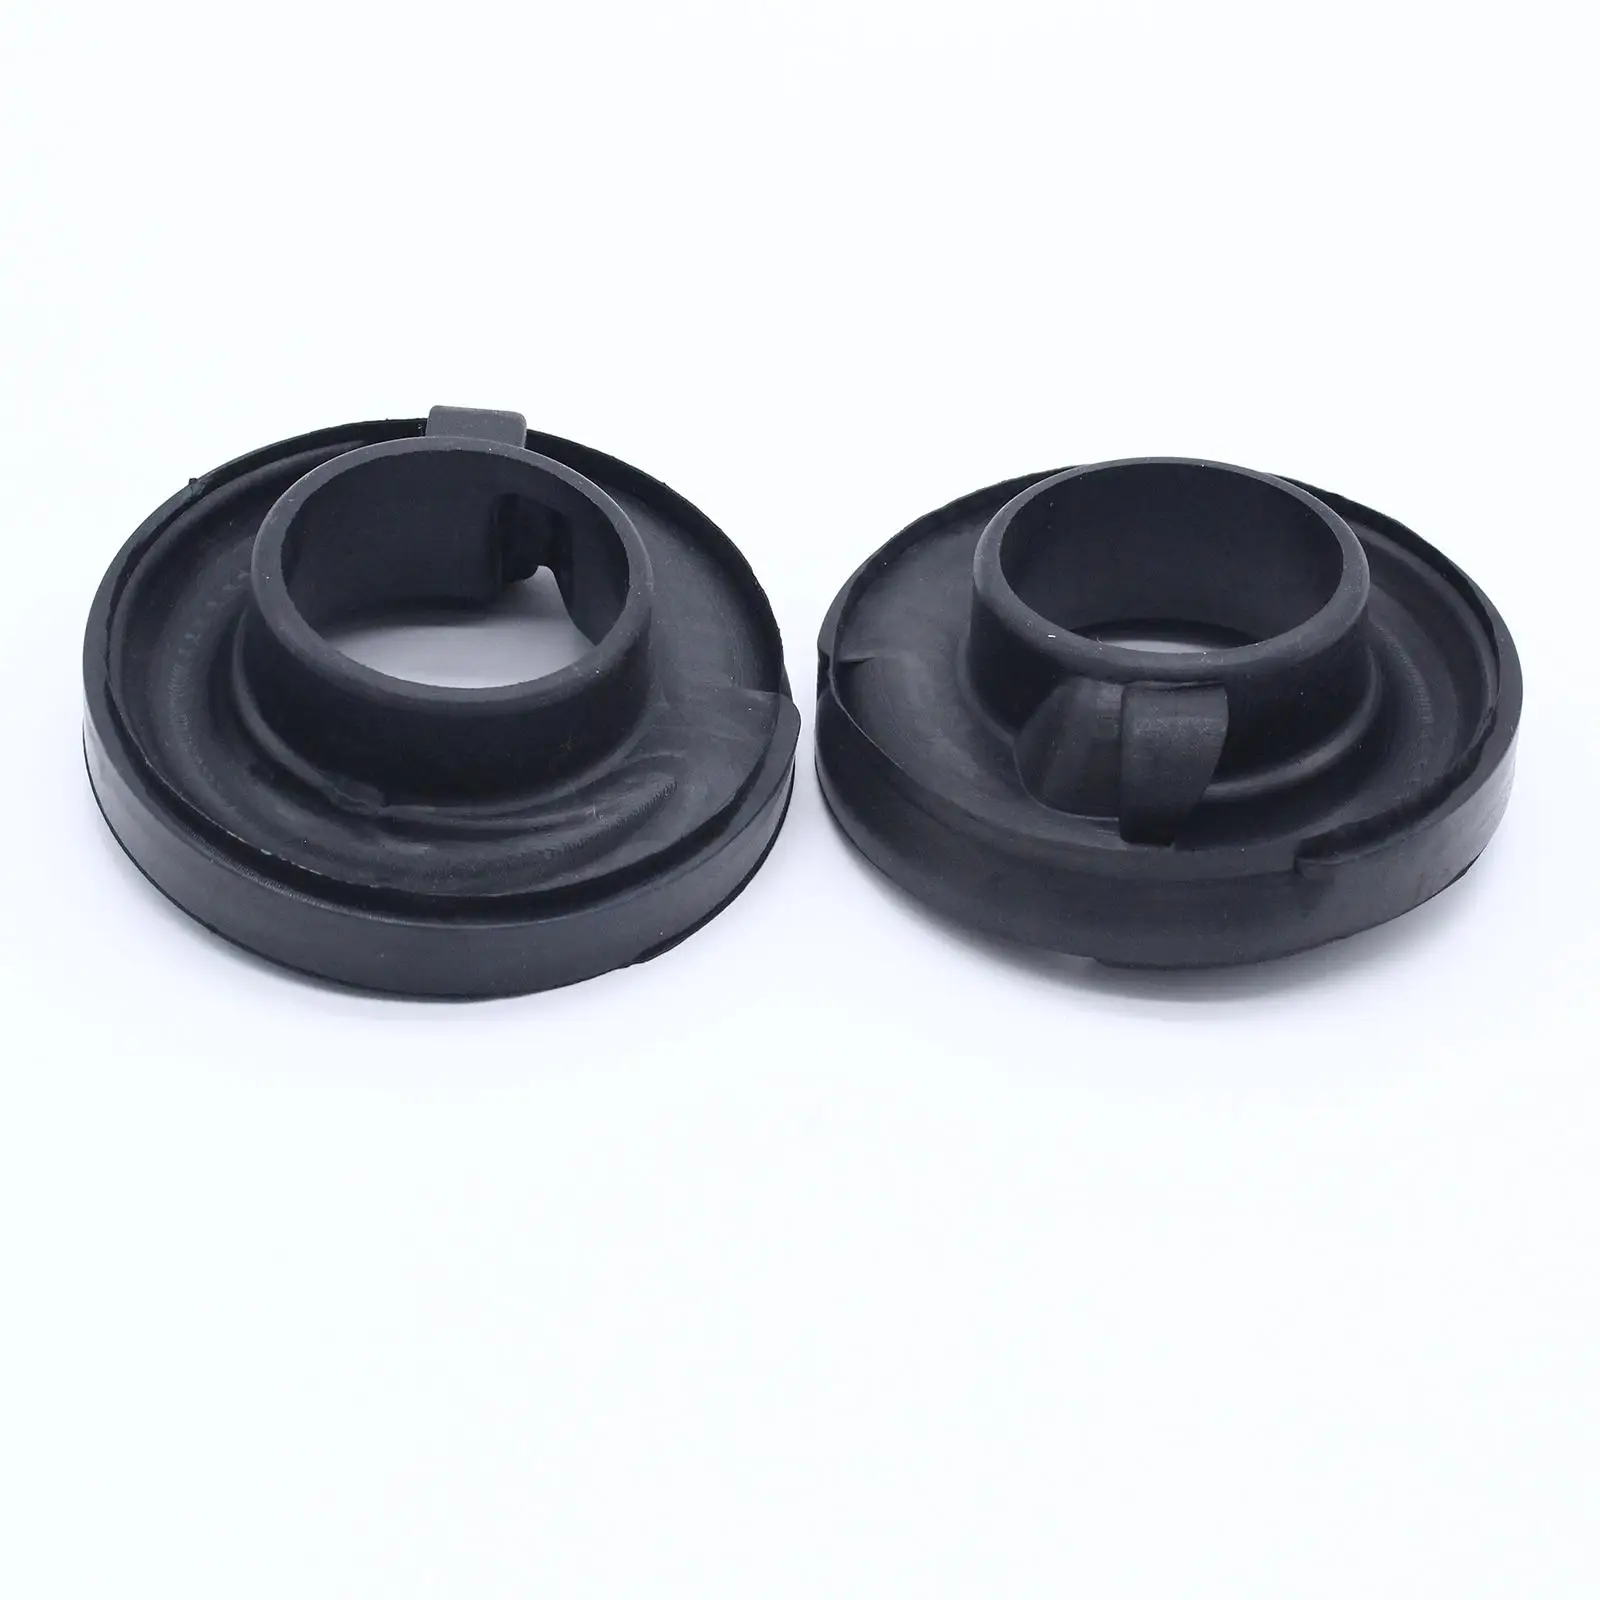 2x Car Rear Lower Spring Rubber Cup Mount for VW T5   2003-2015 Black